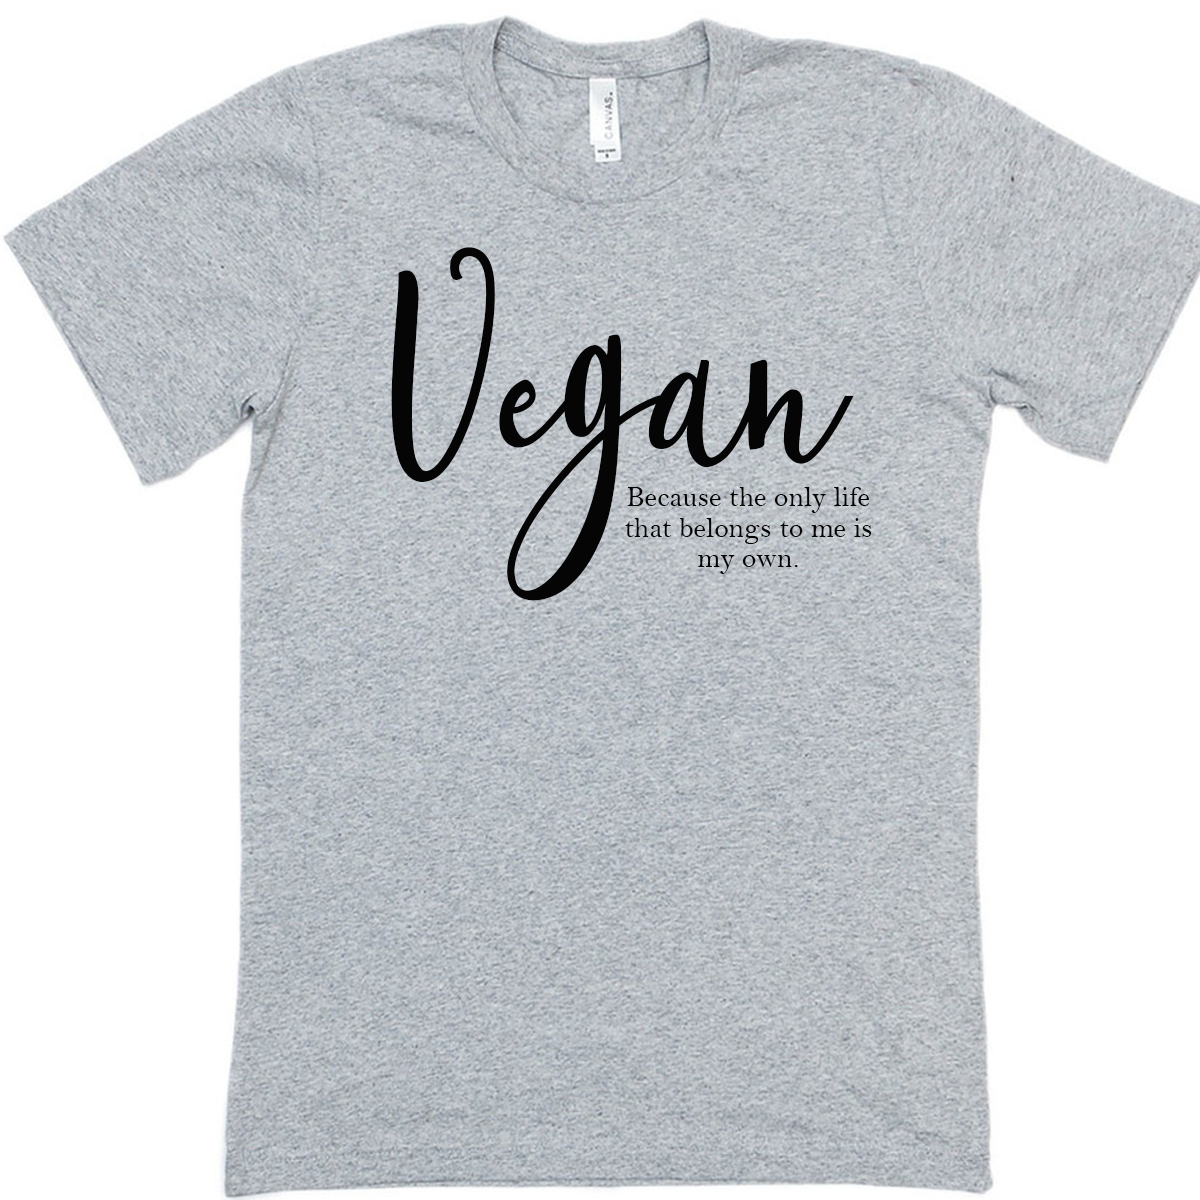 Vegan - Because the only life that belongs to me is my own grey t-shirt